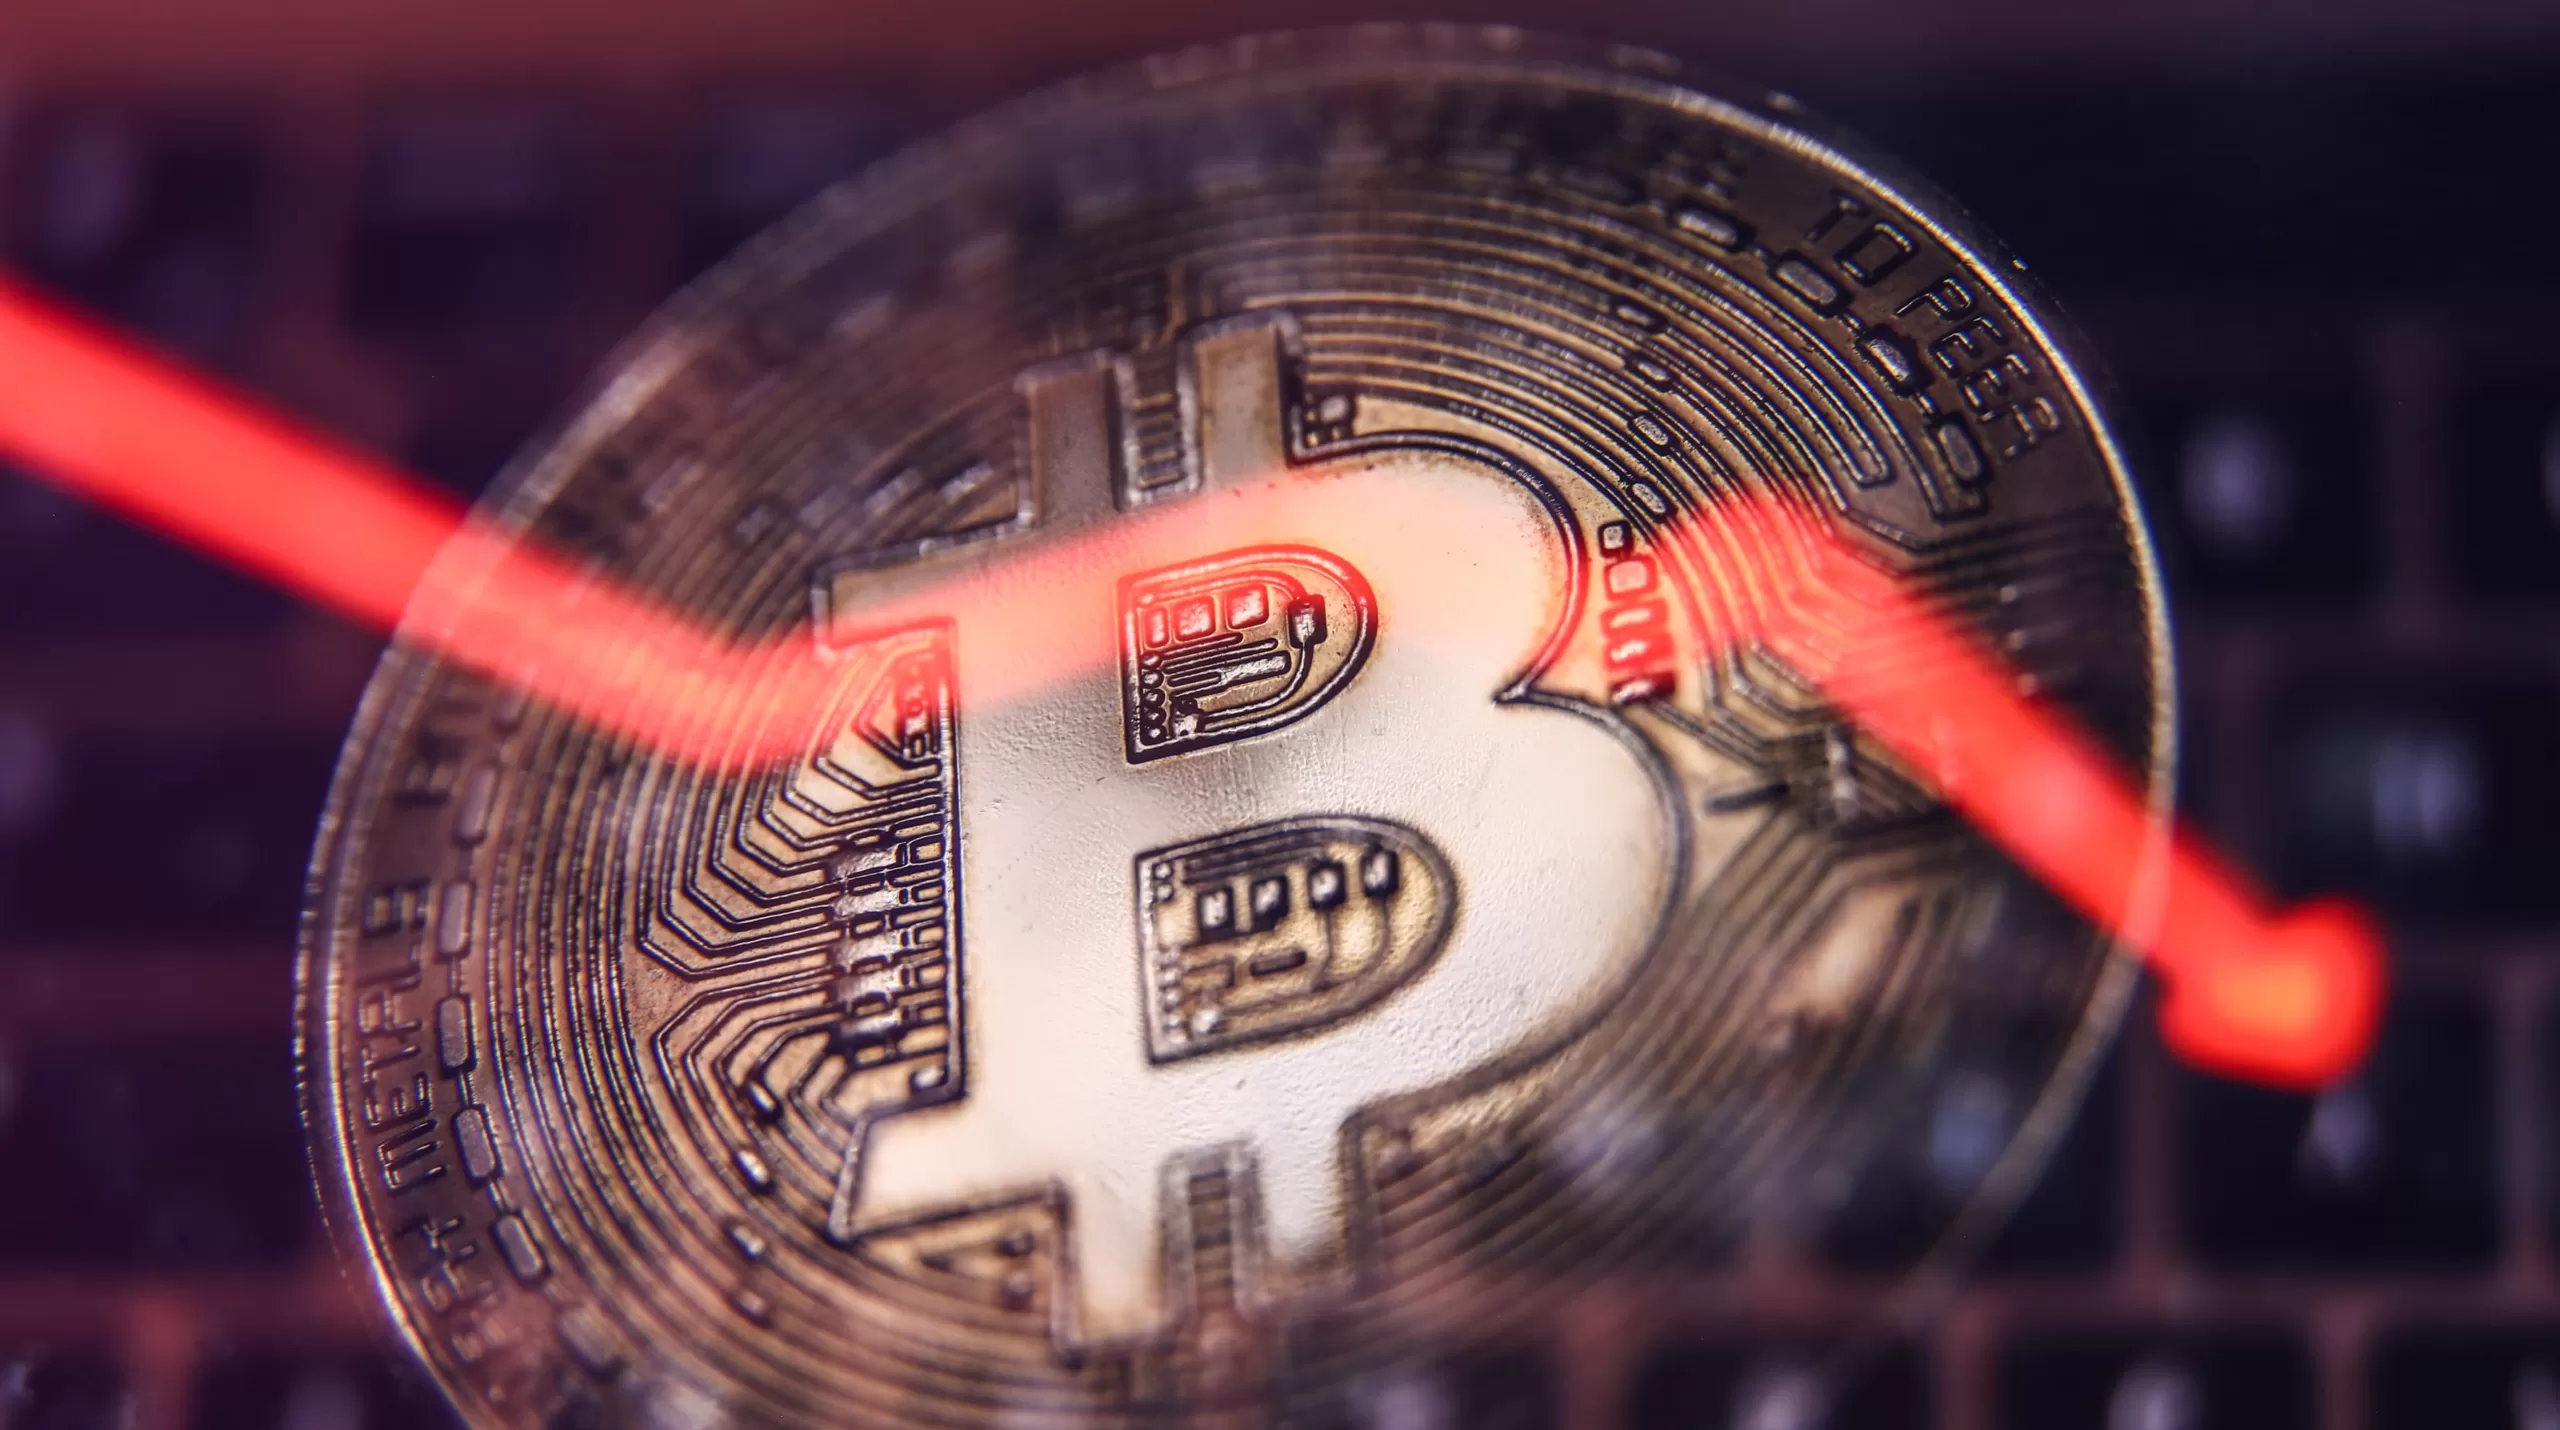 Read more about the article Unbelievable! Bitcoin Price Crashes to $25,409 from $27,677 in Minutes – What’s the Real Story Behind This Shocking Plunge?